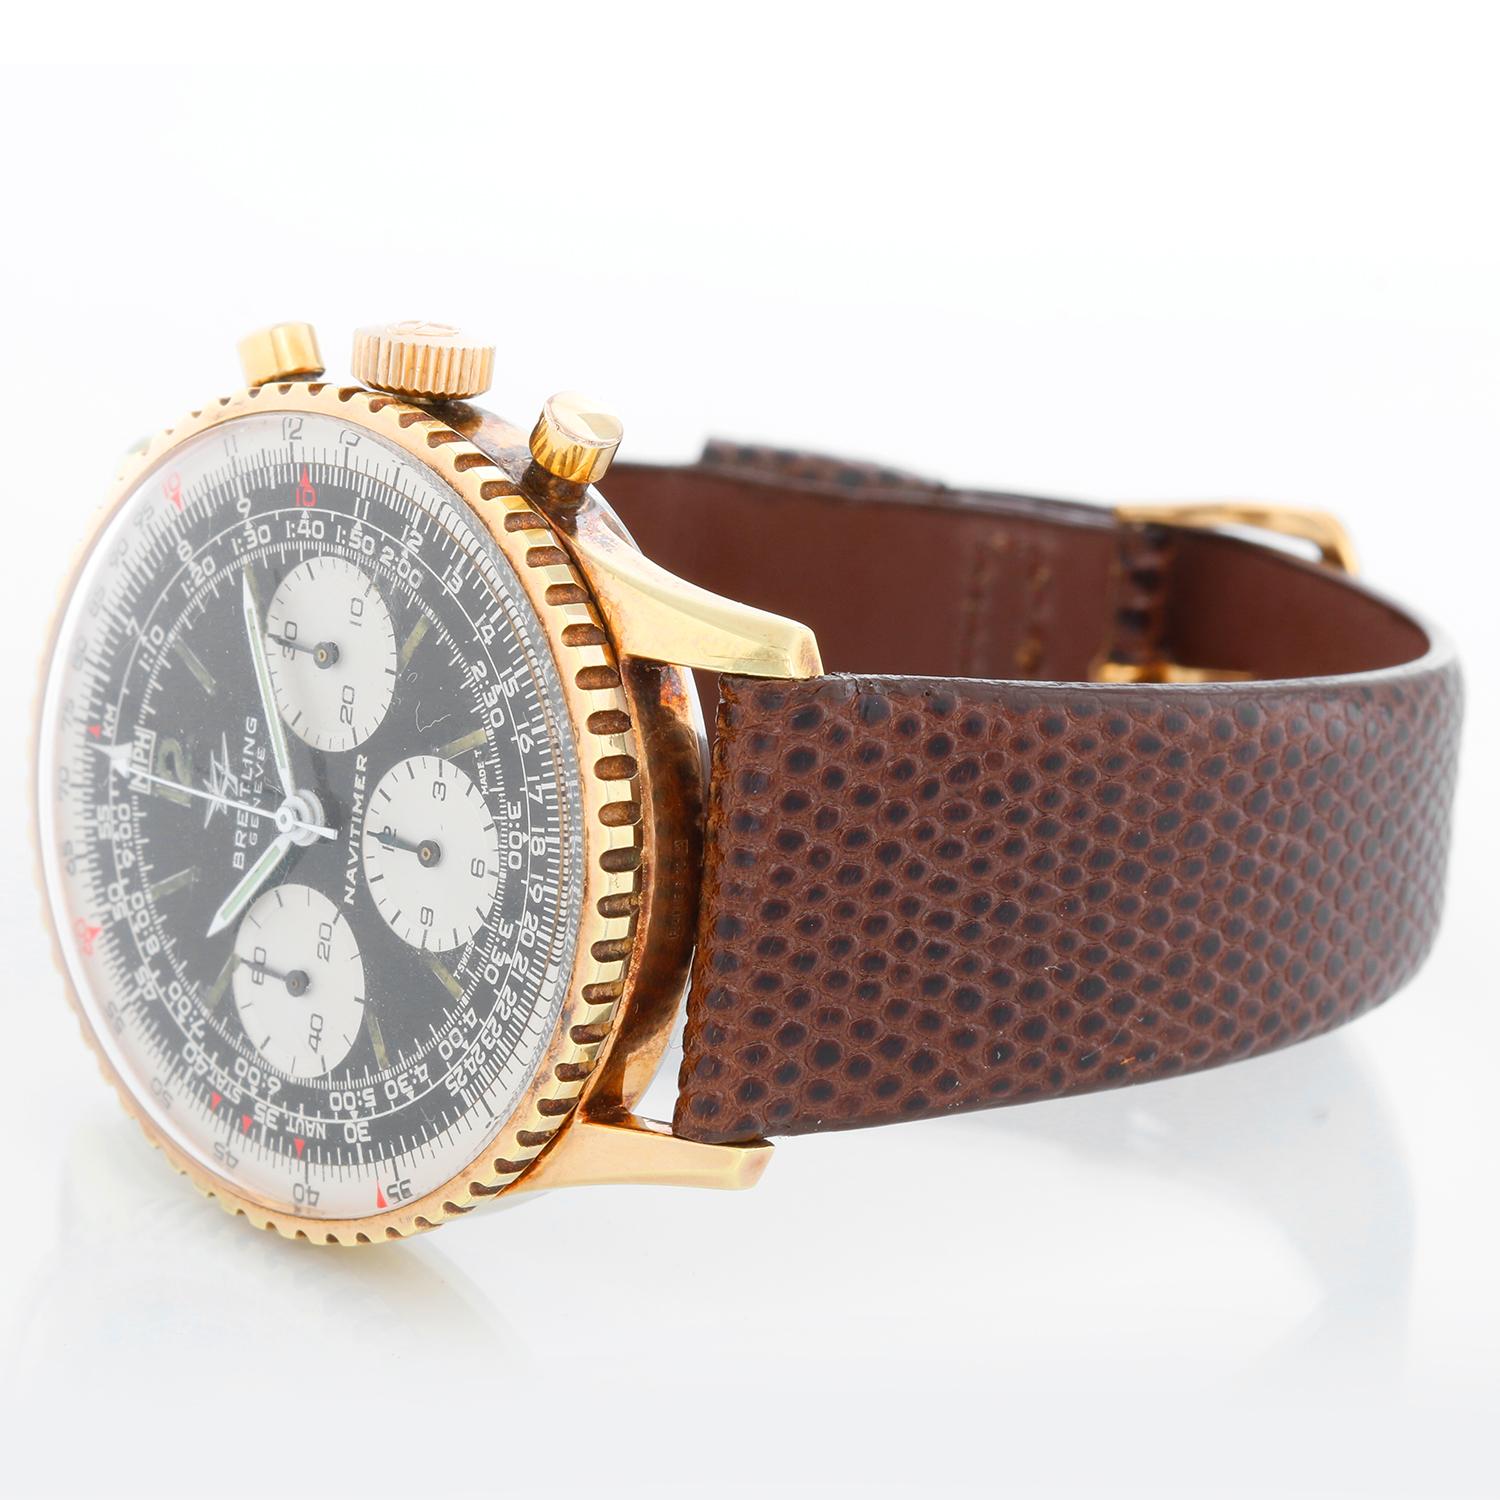 Vintage Breitling Navitimer Men's Steel Chronograph Watch 806 - Manual winding chronograph. Gold Plated and Stainless steel case (40mm diameter). Black dial with silver subdials. Genuine brown leather strap with tang buckle . Pre-owned with